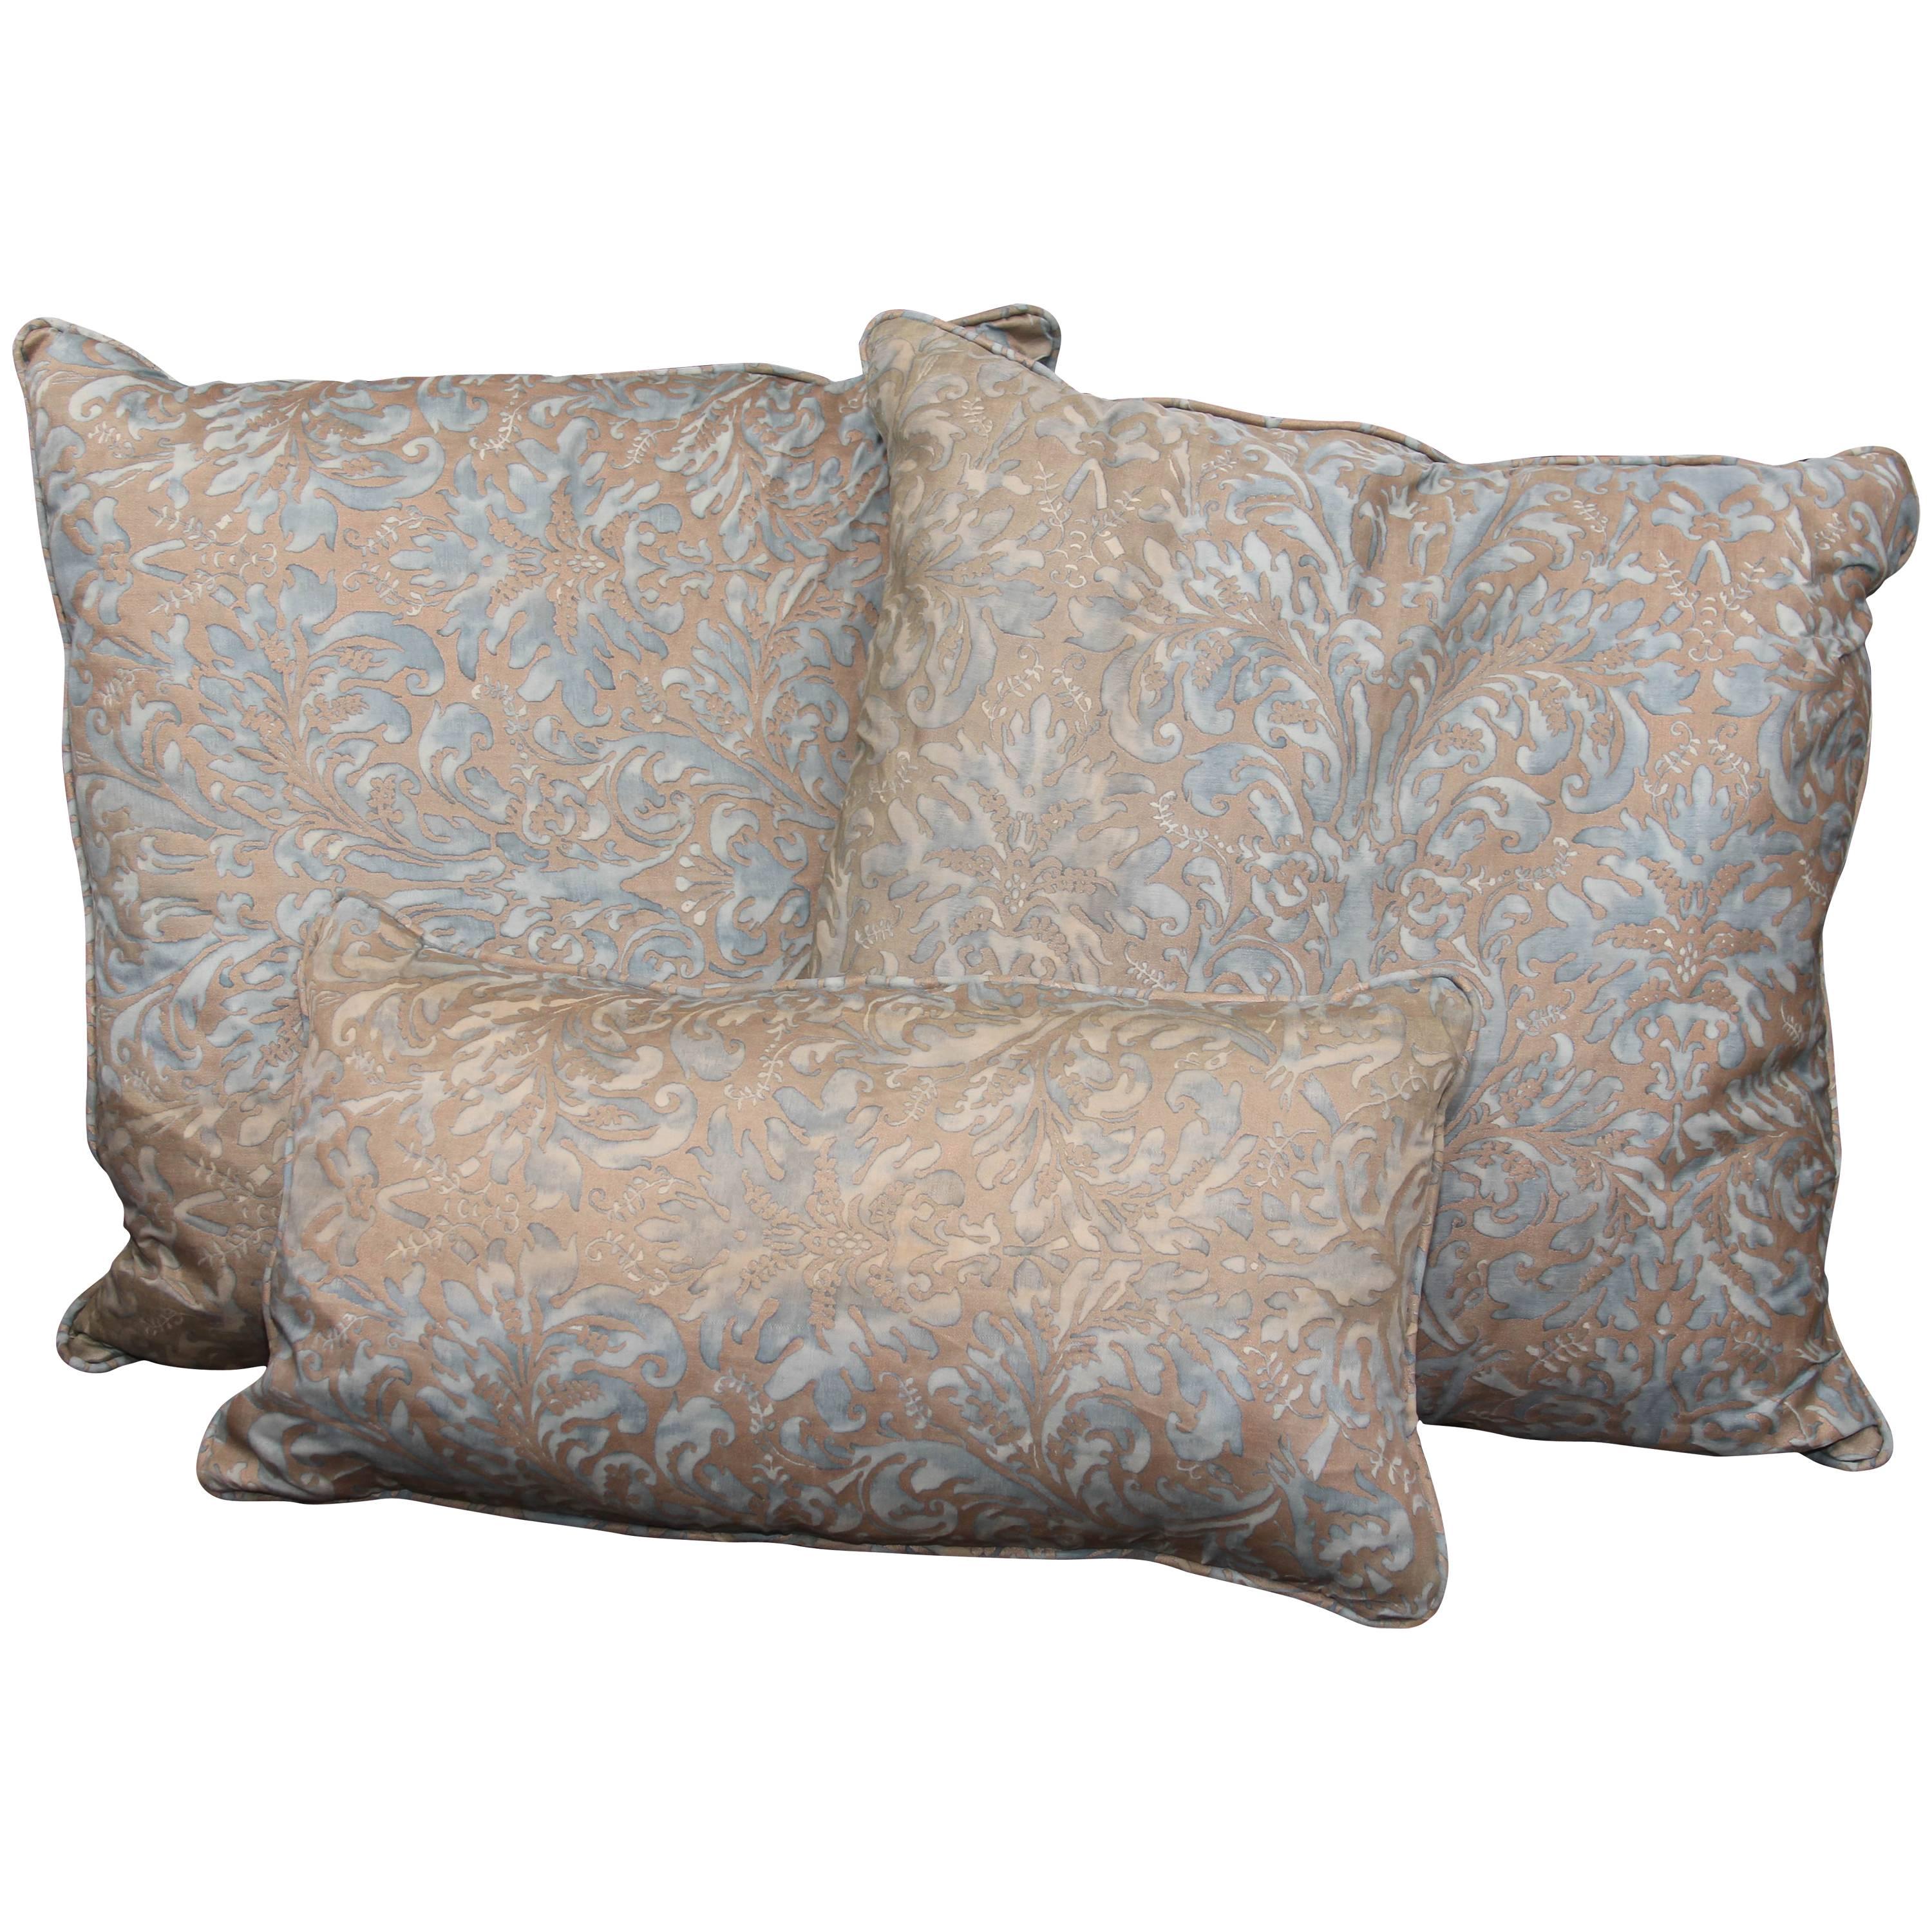 Group of Three Fortuny and Linen Pillows